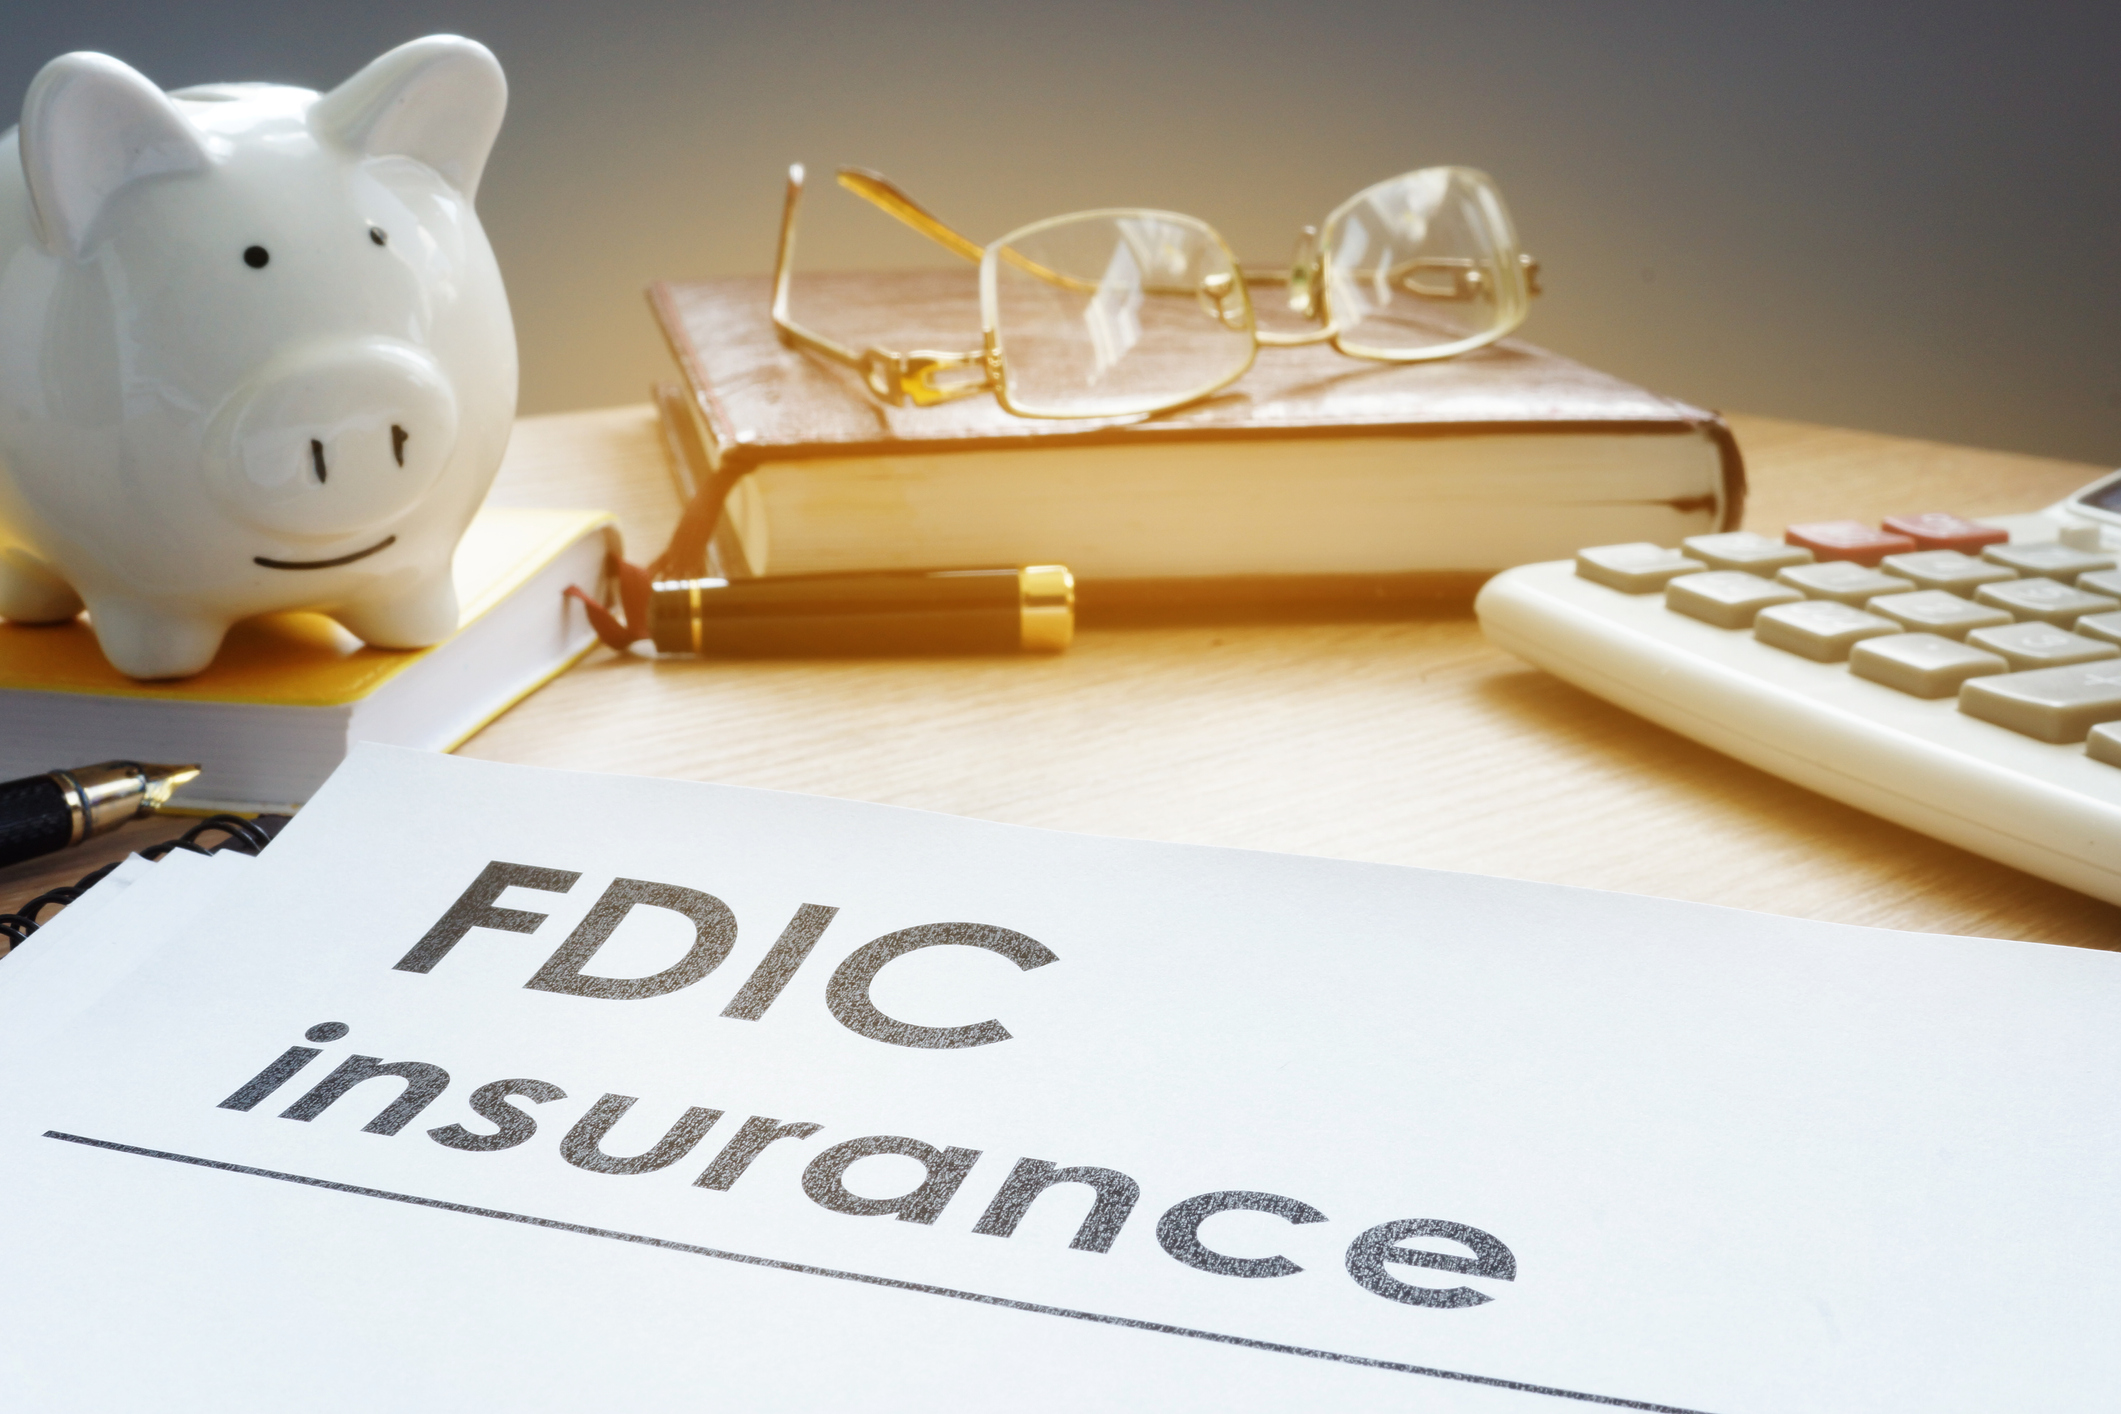 Fdic Insurance Limits For Business Accounts